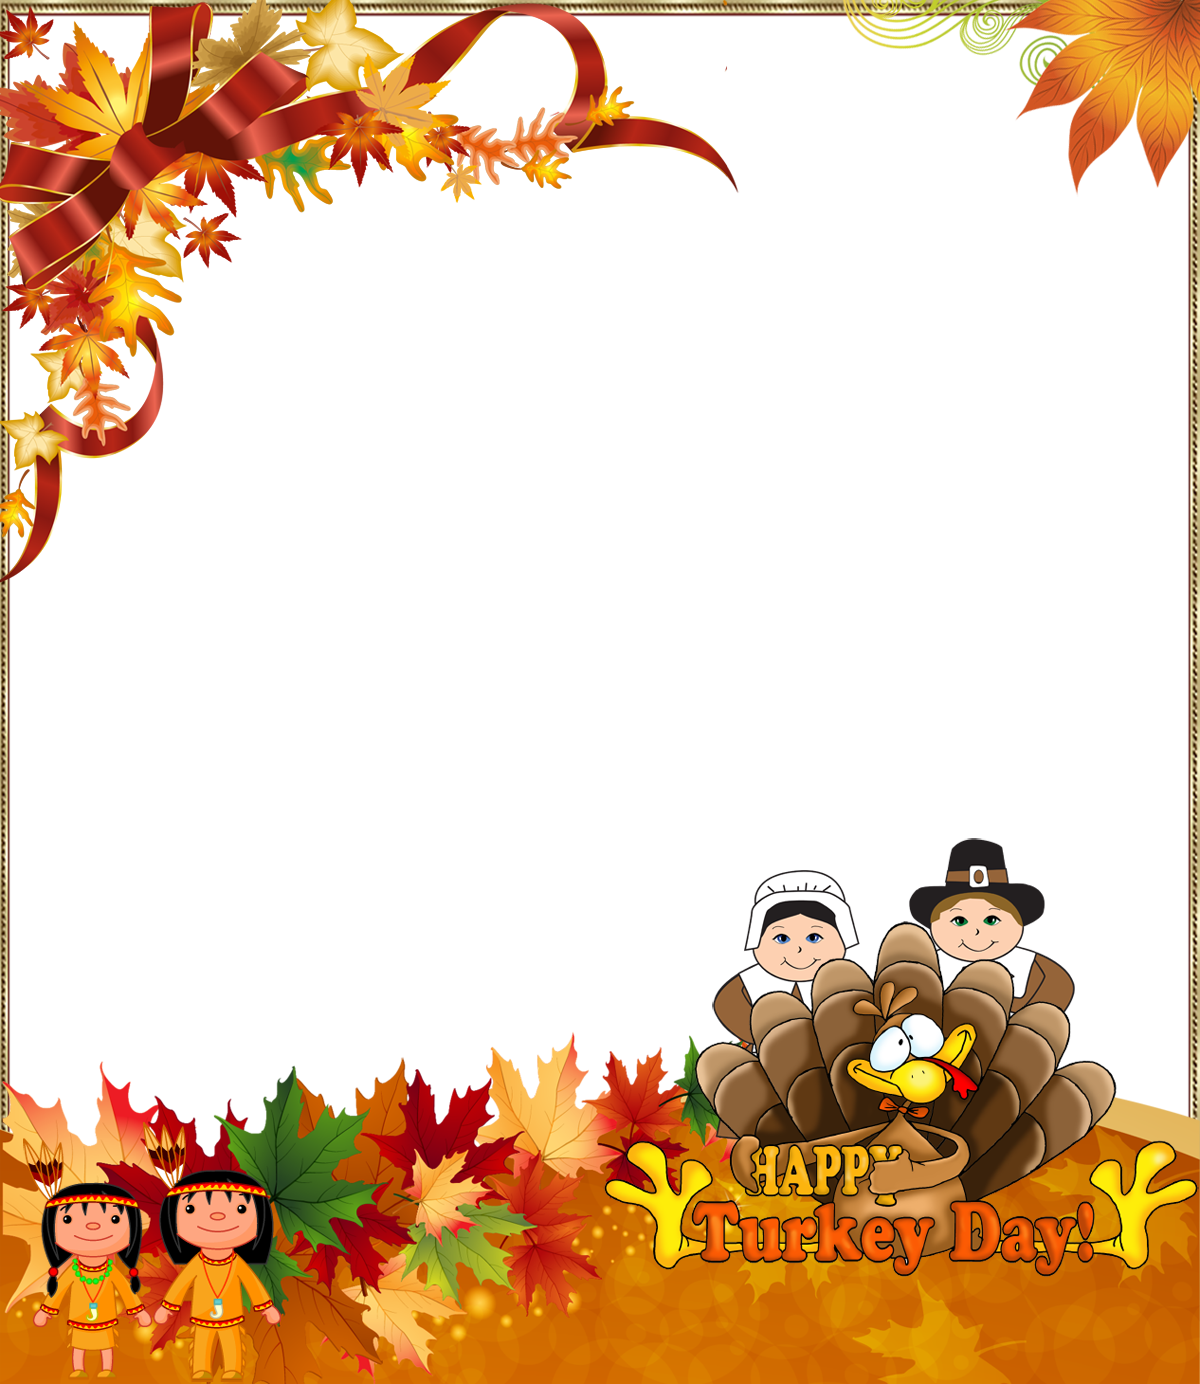 Thanksgiving PNG Photo Frame Happy Turkey Day Quality Image And Transparent PNG Free Clipart